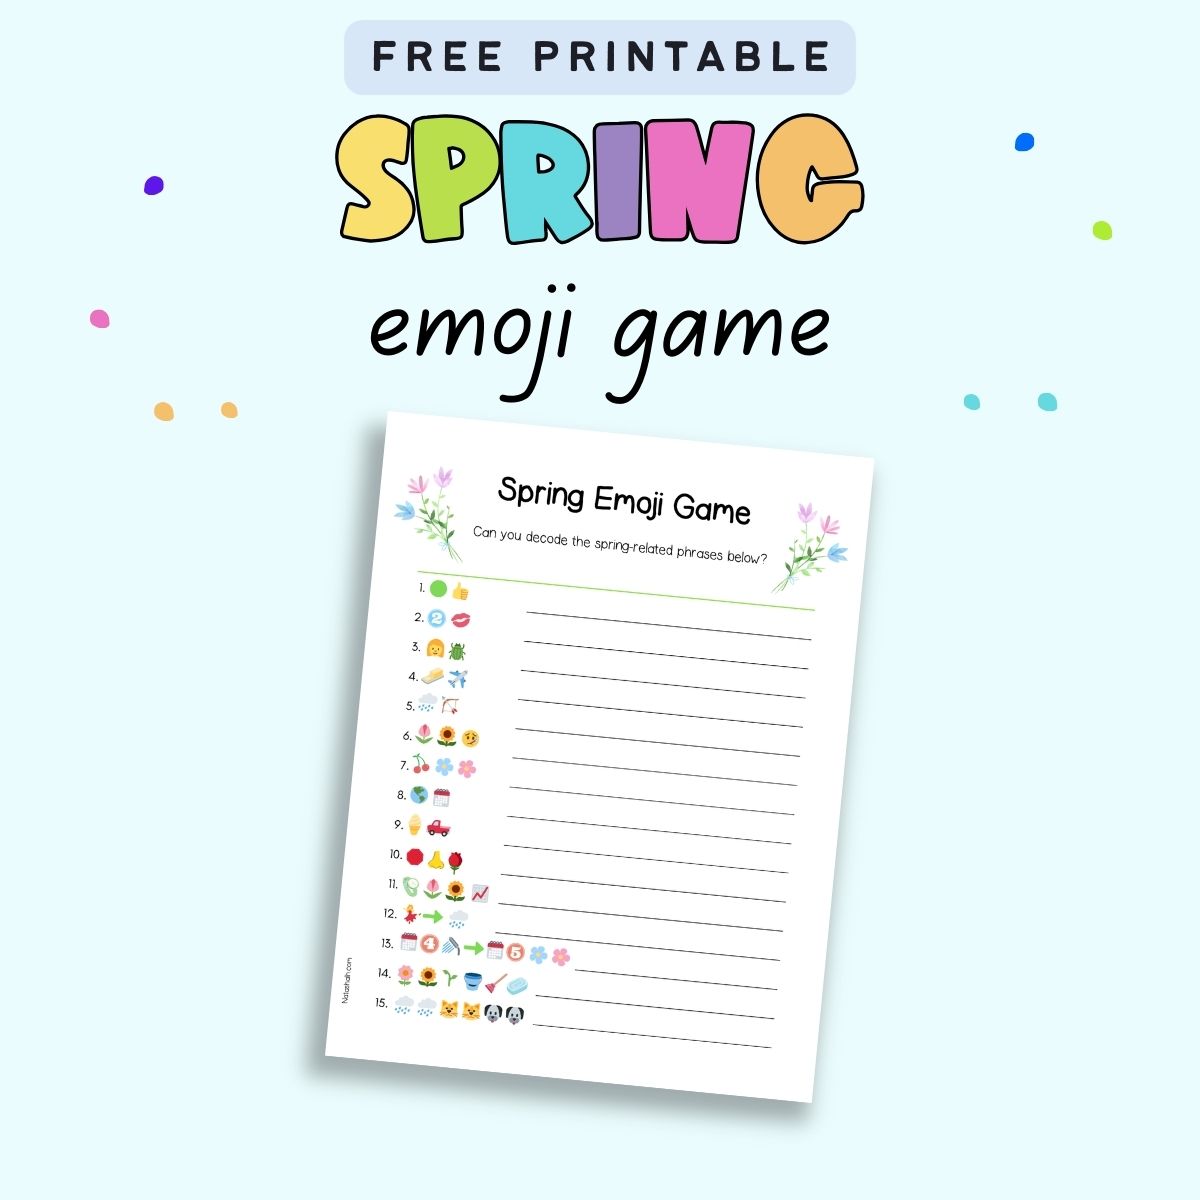 Text "free printable spring emoji game" with a spring emoji pictionary game with 15 different phrases to decode